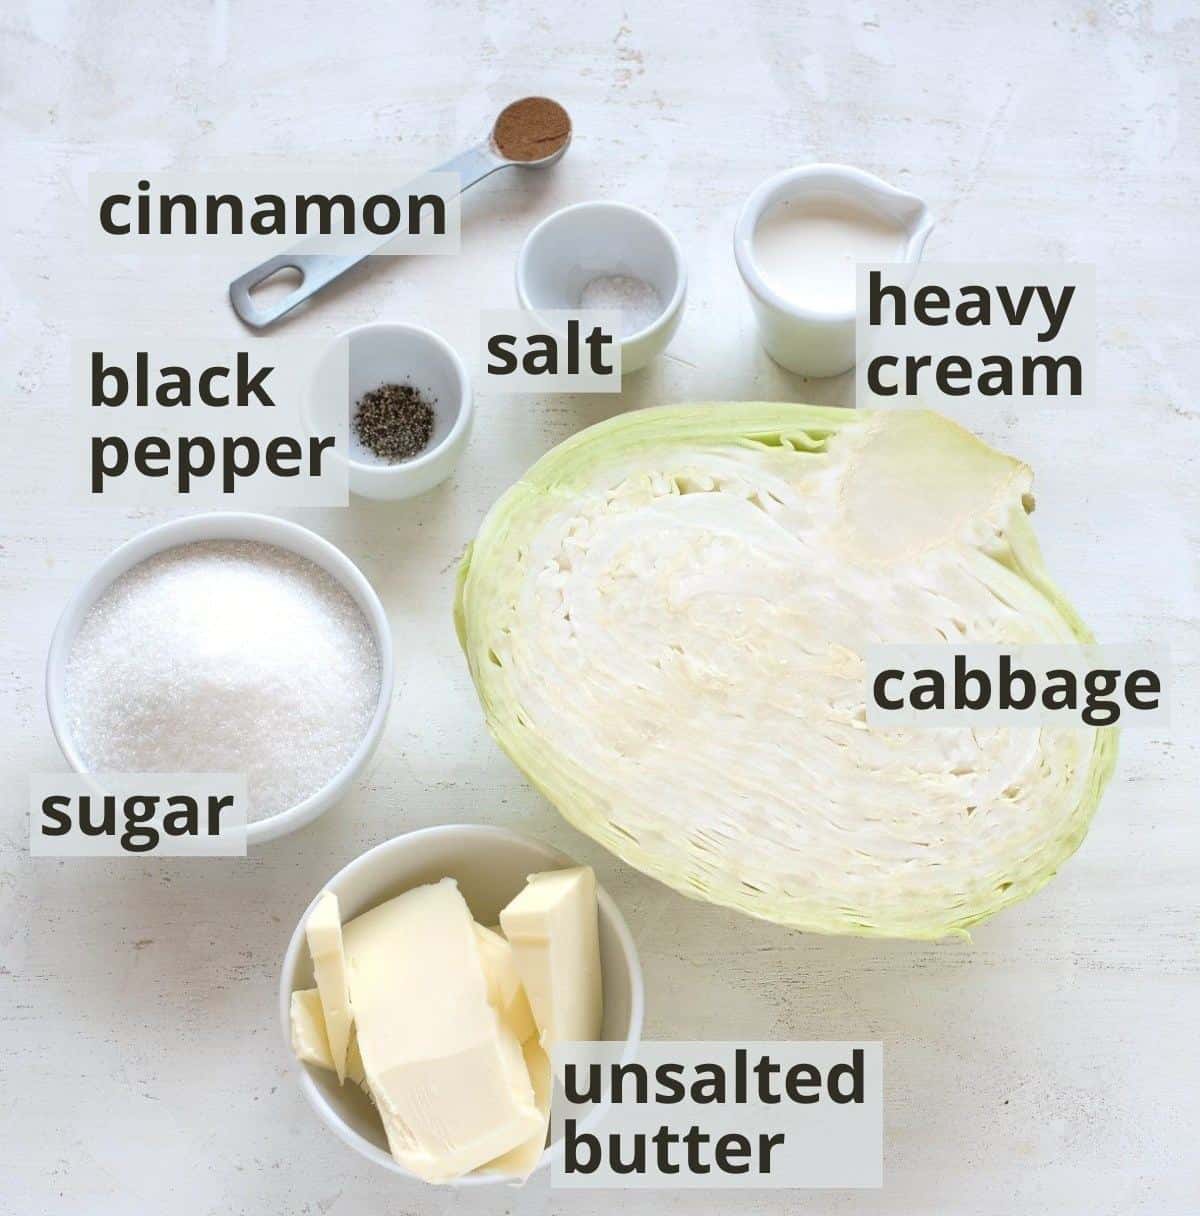 Ingredients for sweet cabbage filling inclusive captions.